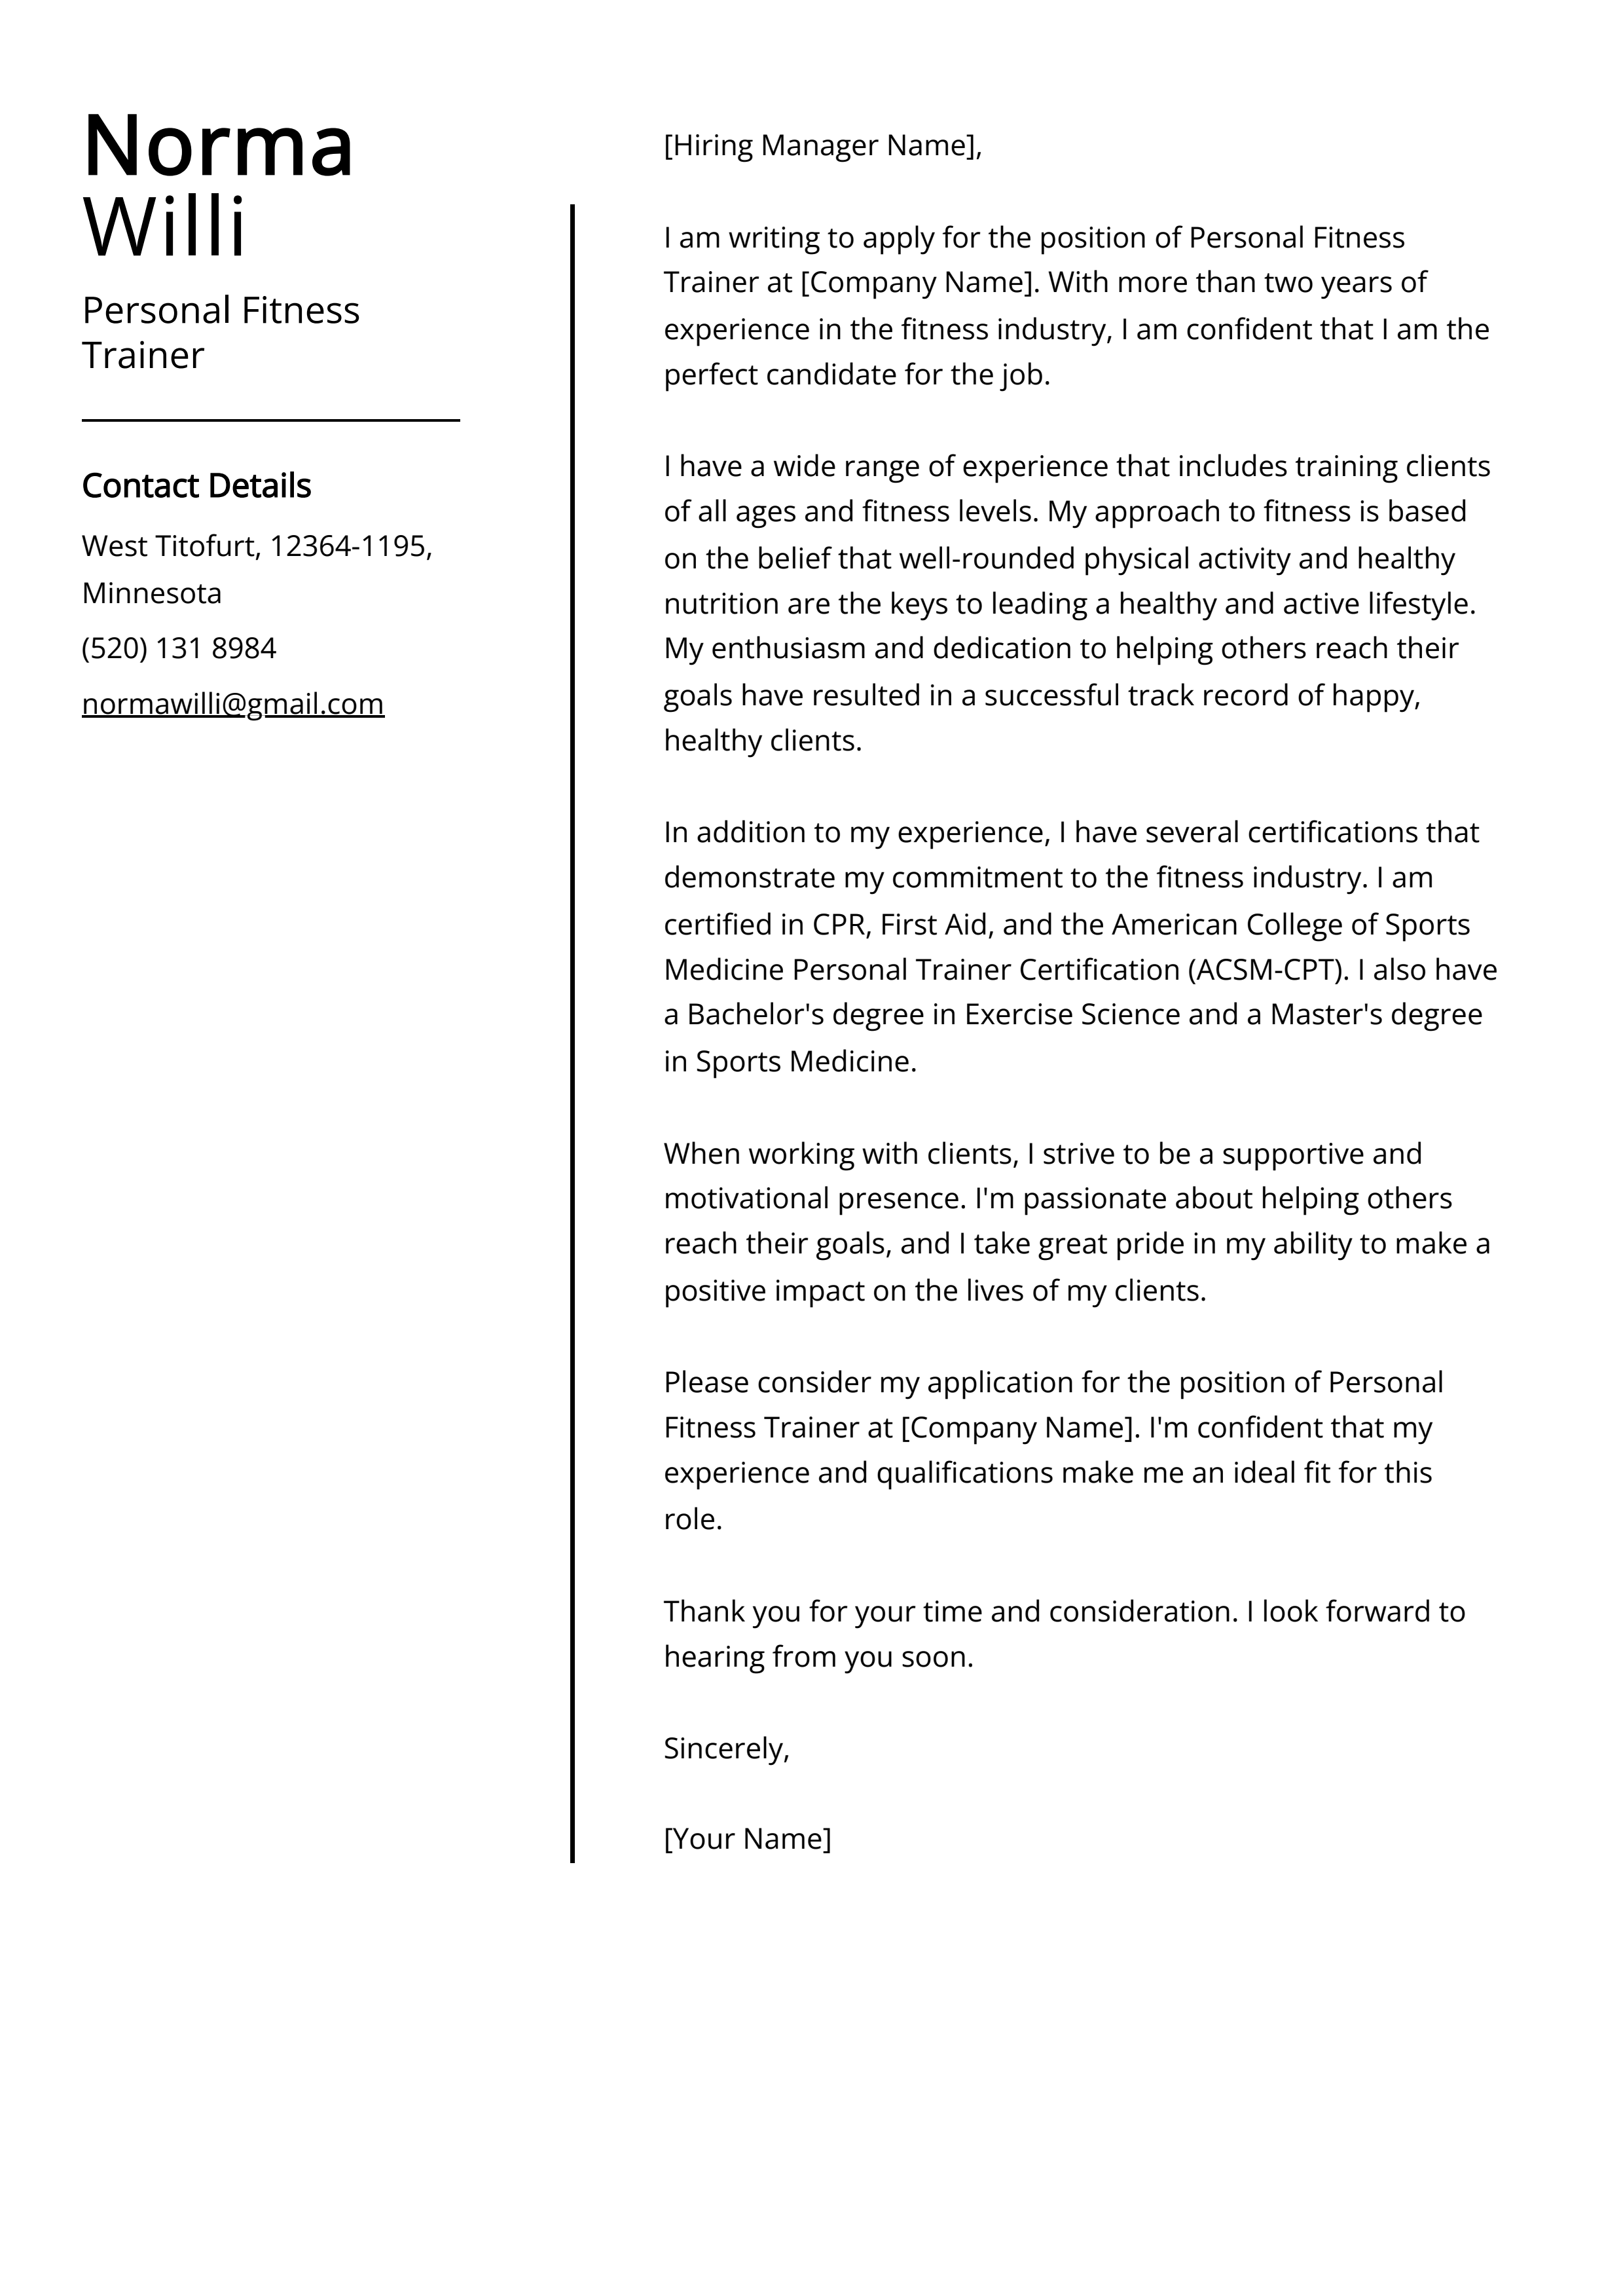 Personal Fitness Trainer Cover Letter Example (Free Guide)